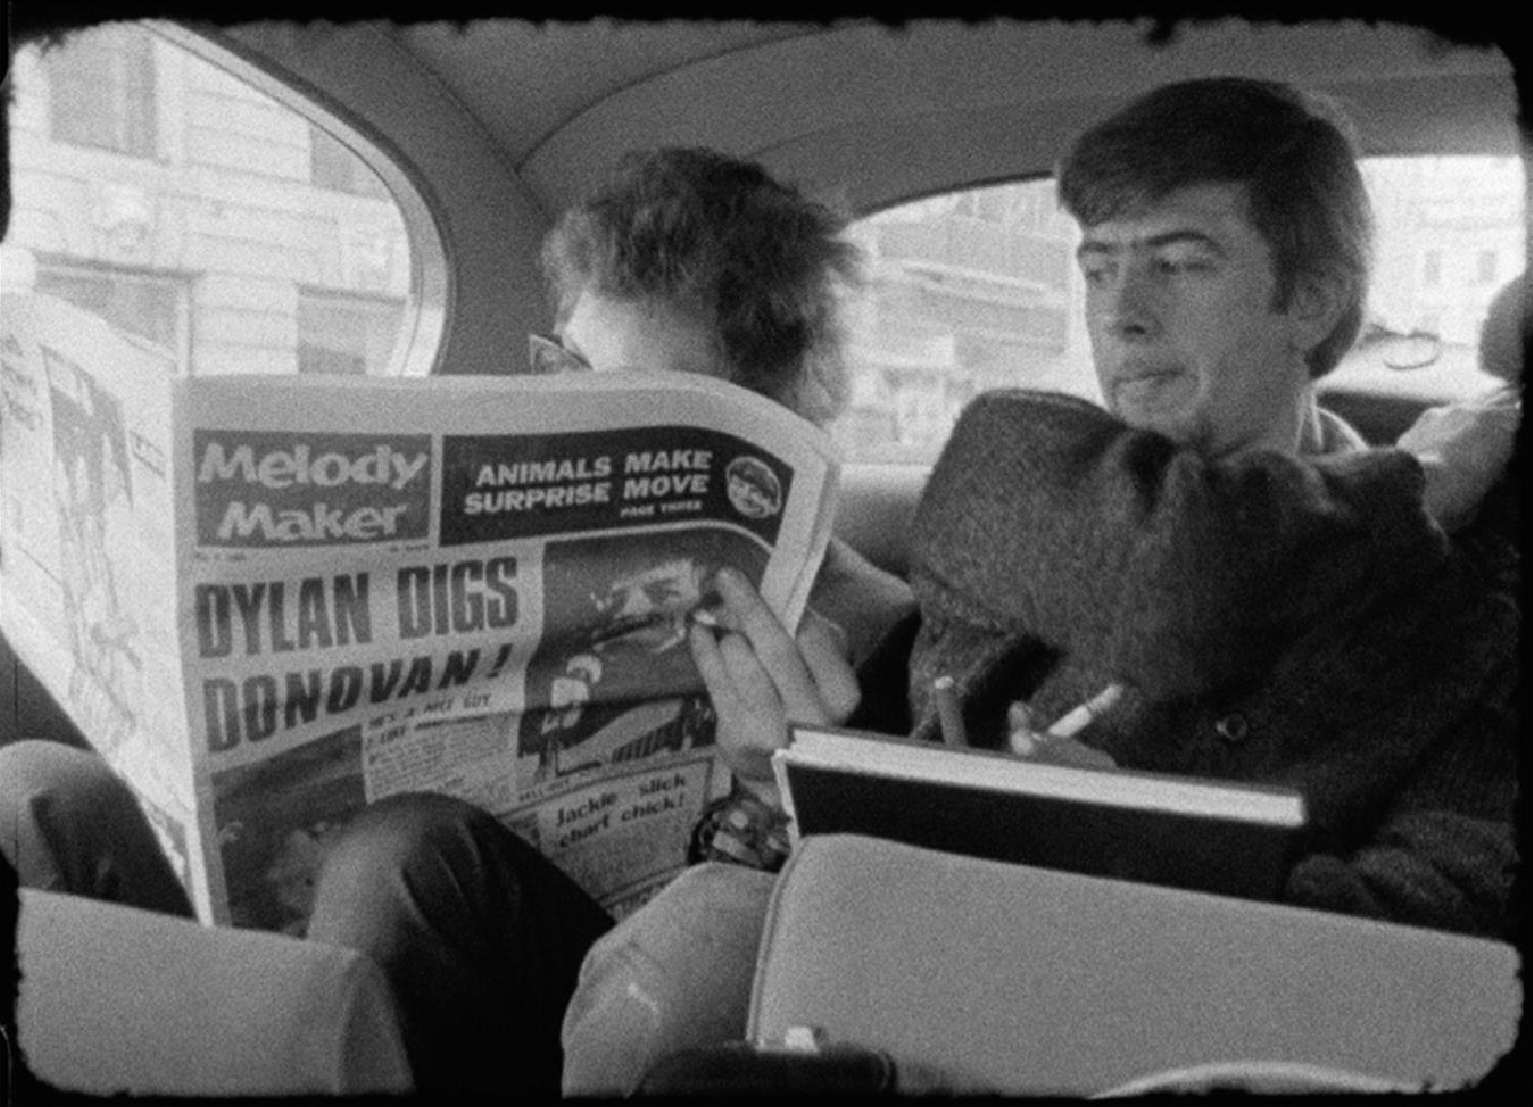 Bob Dylan reads Melody Maker, with John Mayall looking on, in London, 1965.